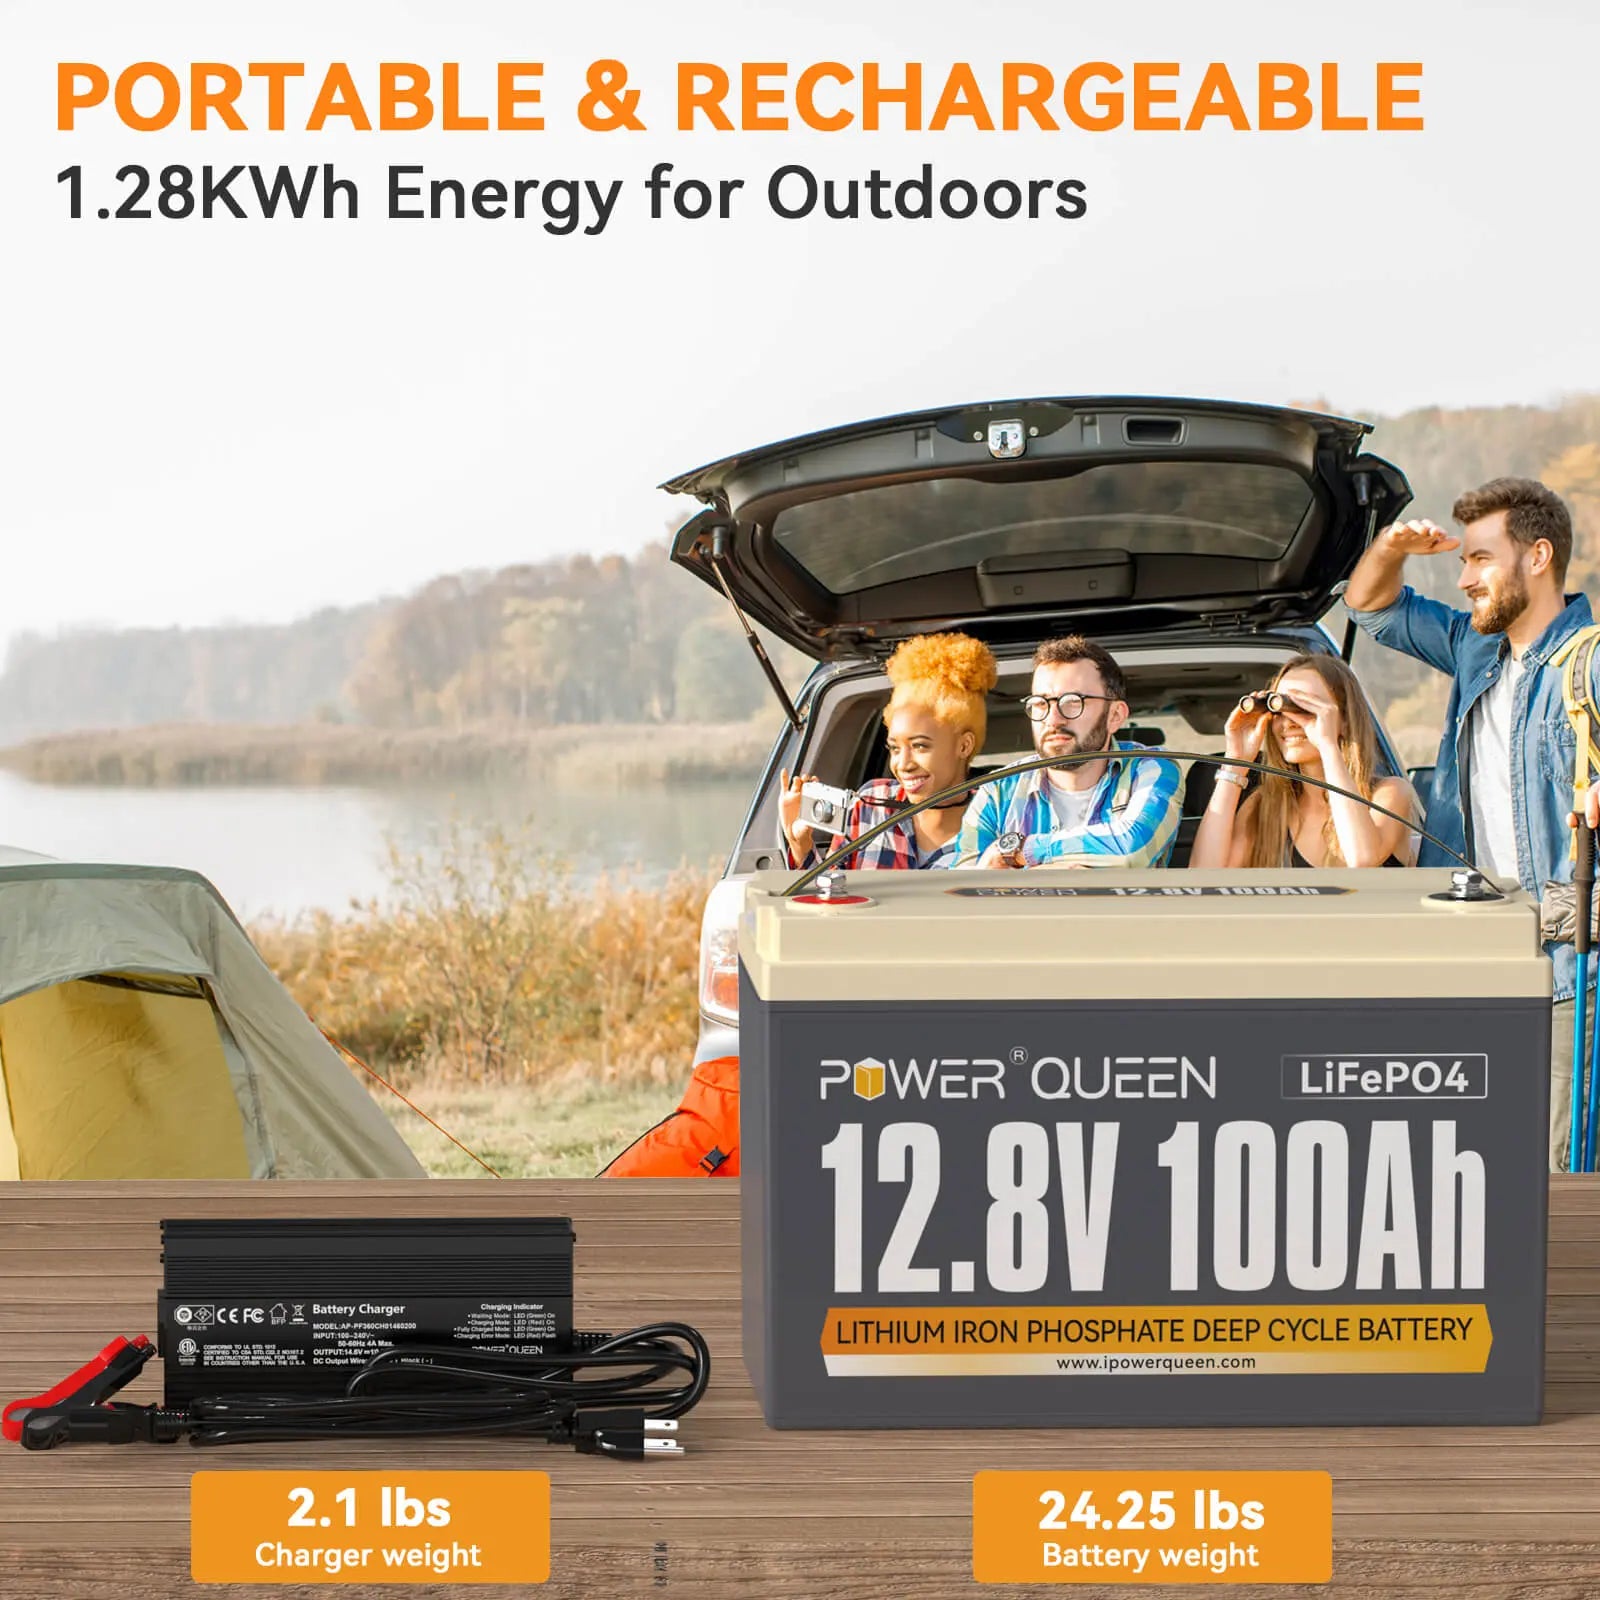 Power Queen 12.8V 100Ah LiFePO4 Battery + 14.6V 10A Charger Power Queen